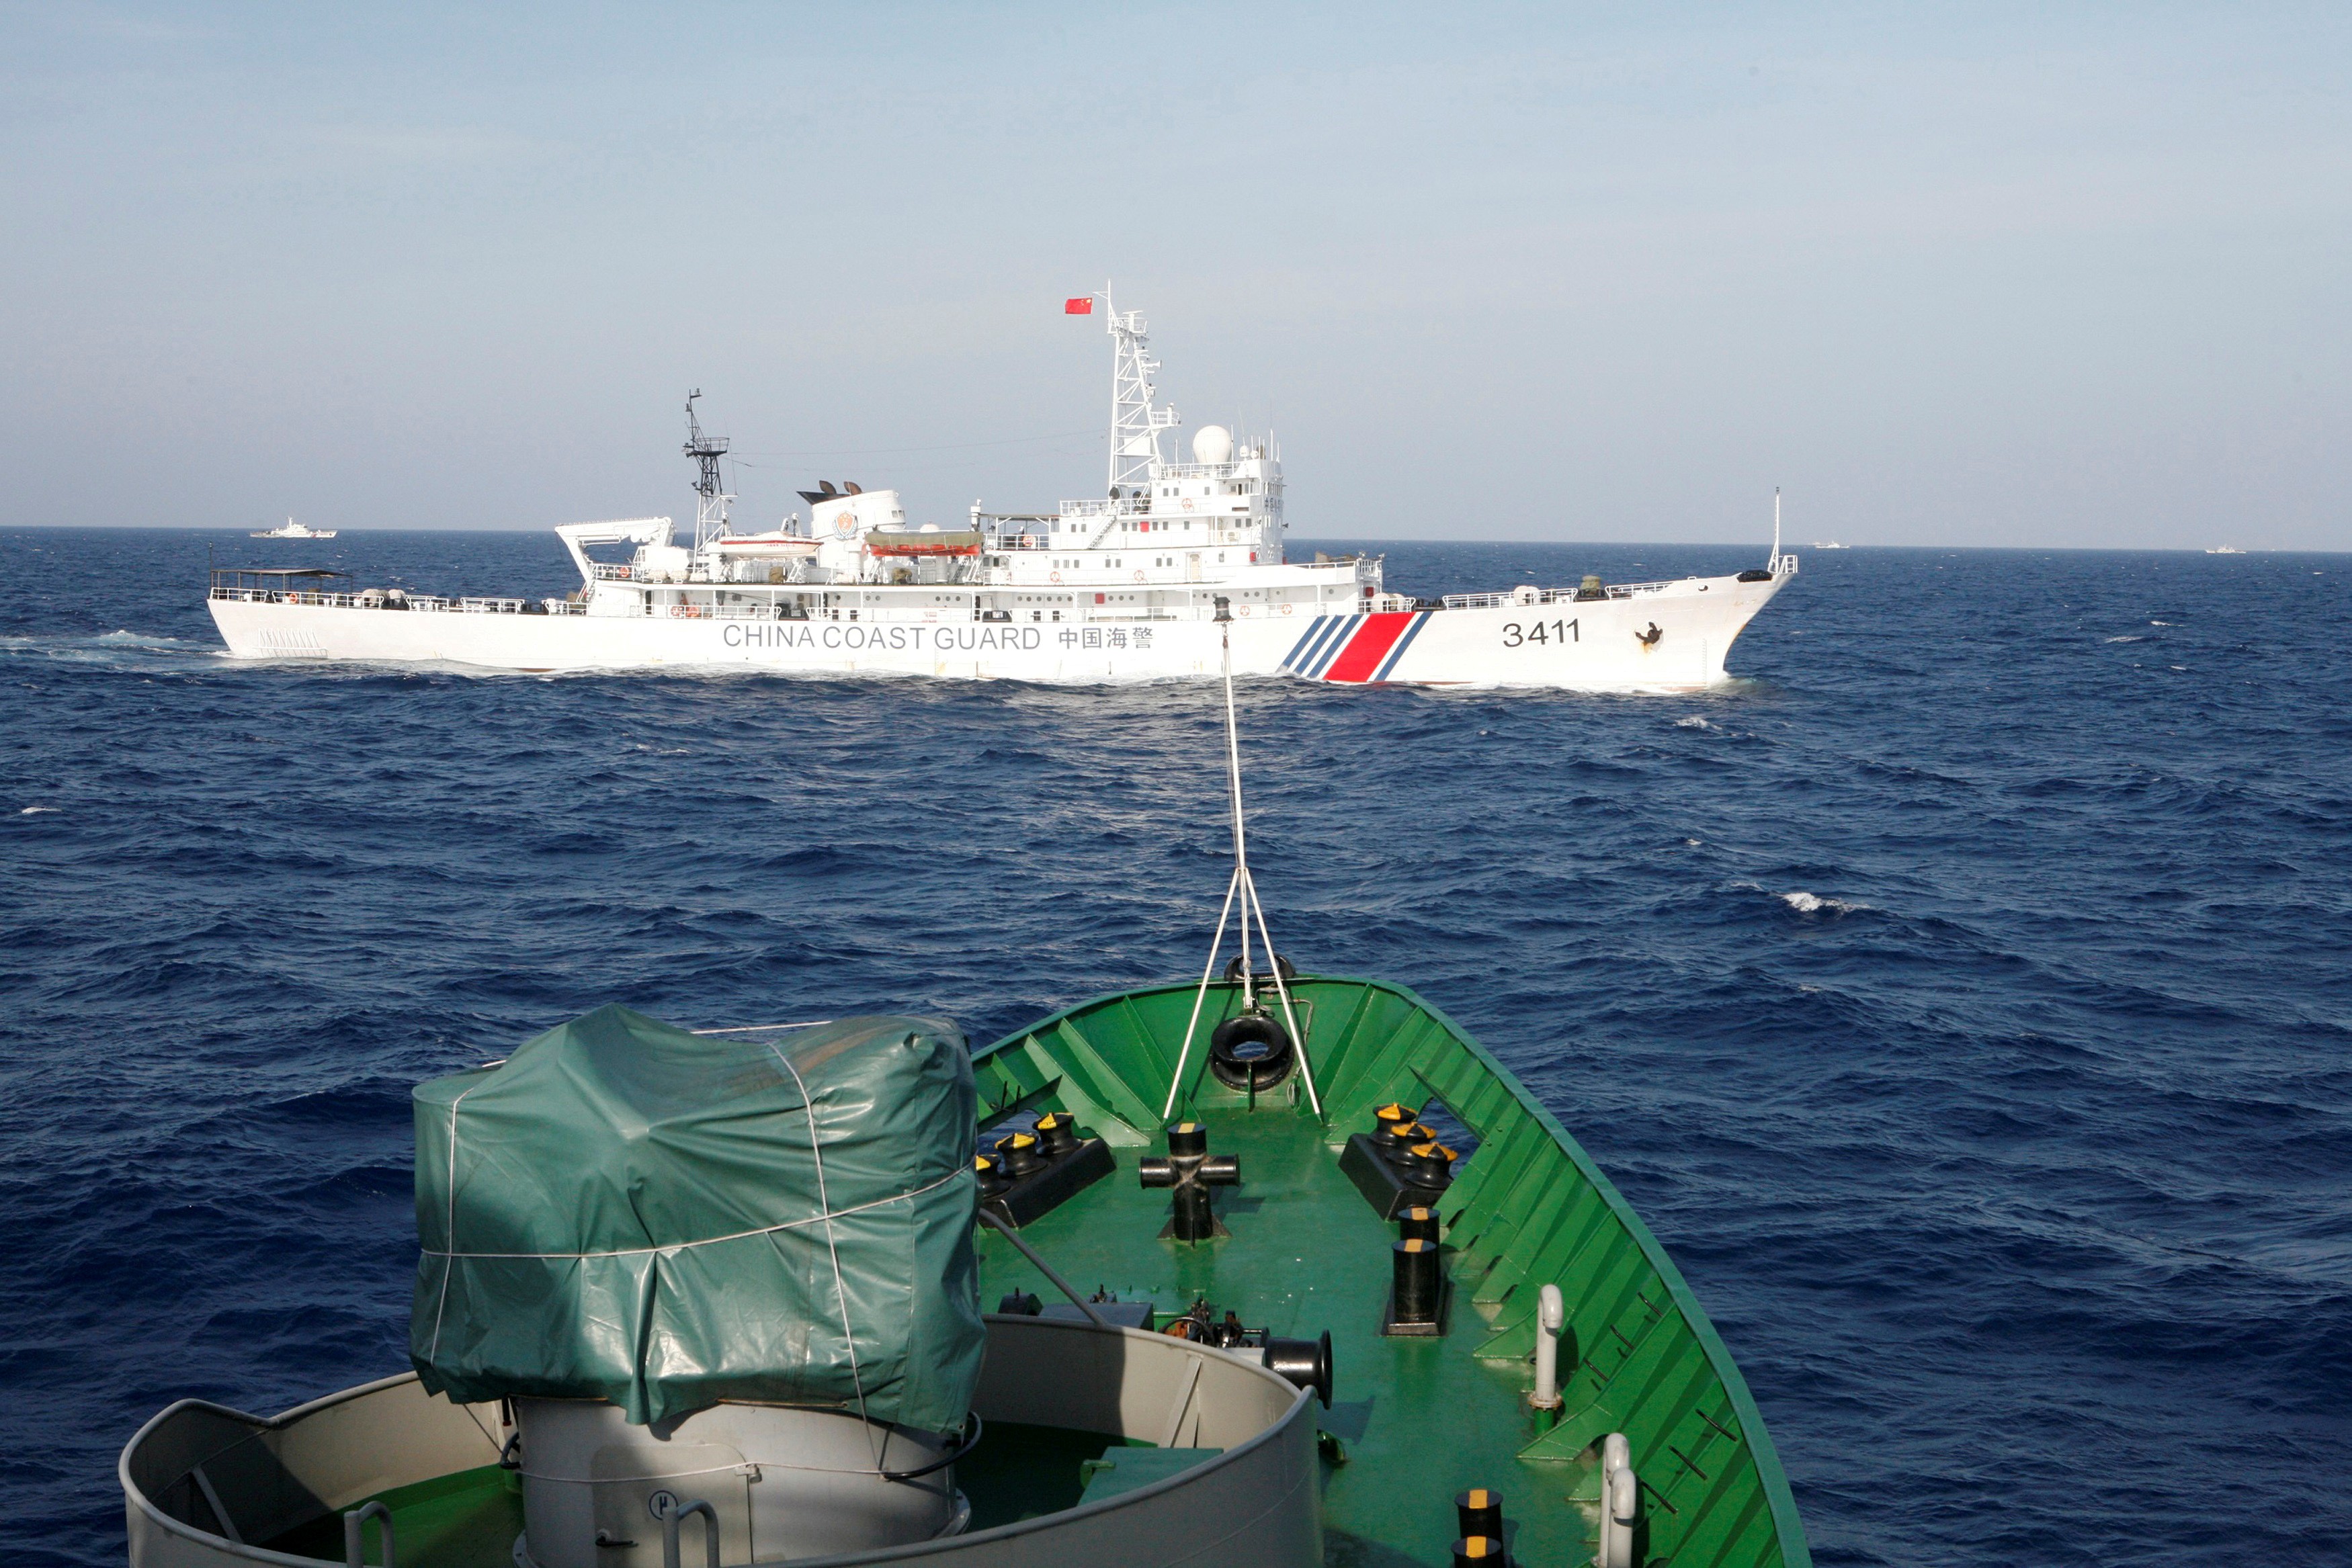 A Chinese coastguard ship is seen about 210km offshore from Vietnam on May 14, 2014. File photo: Reuters